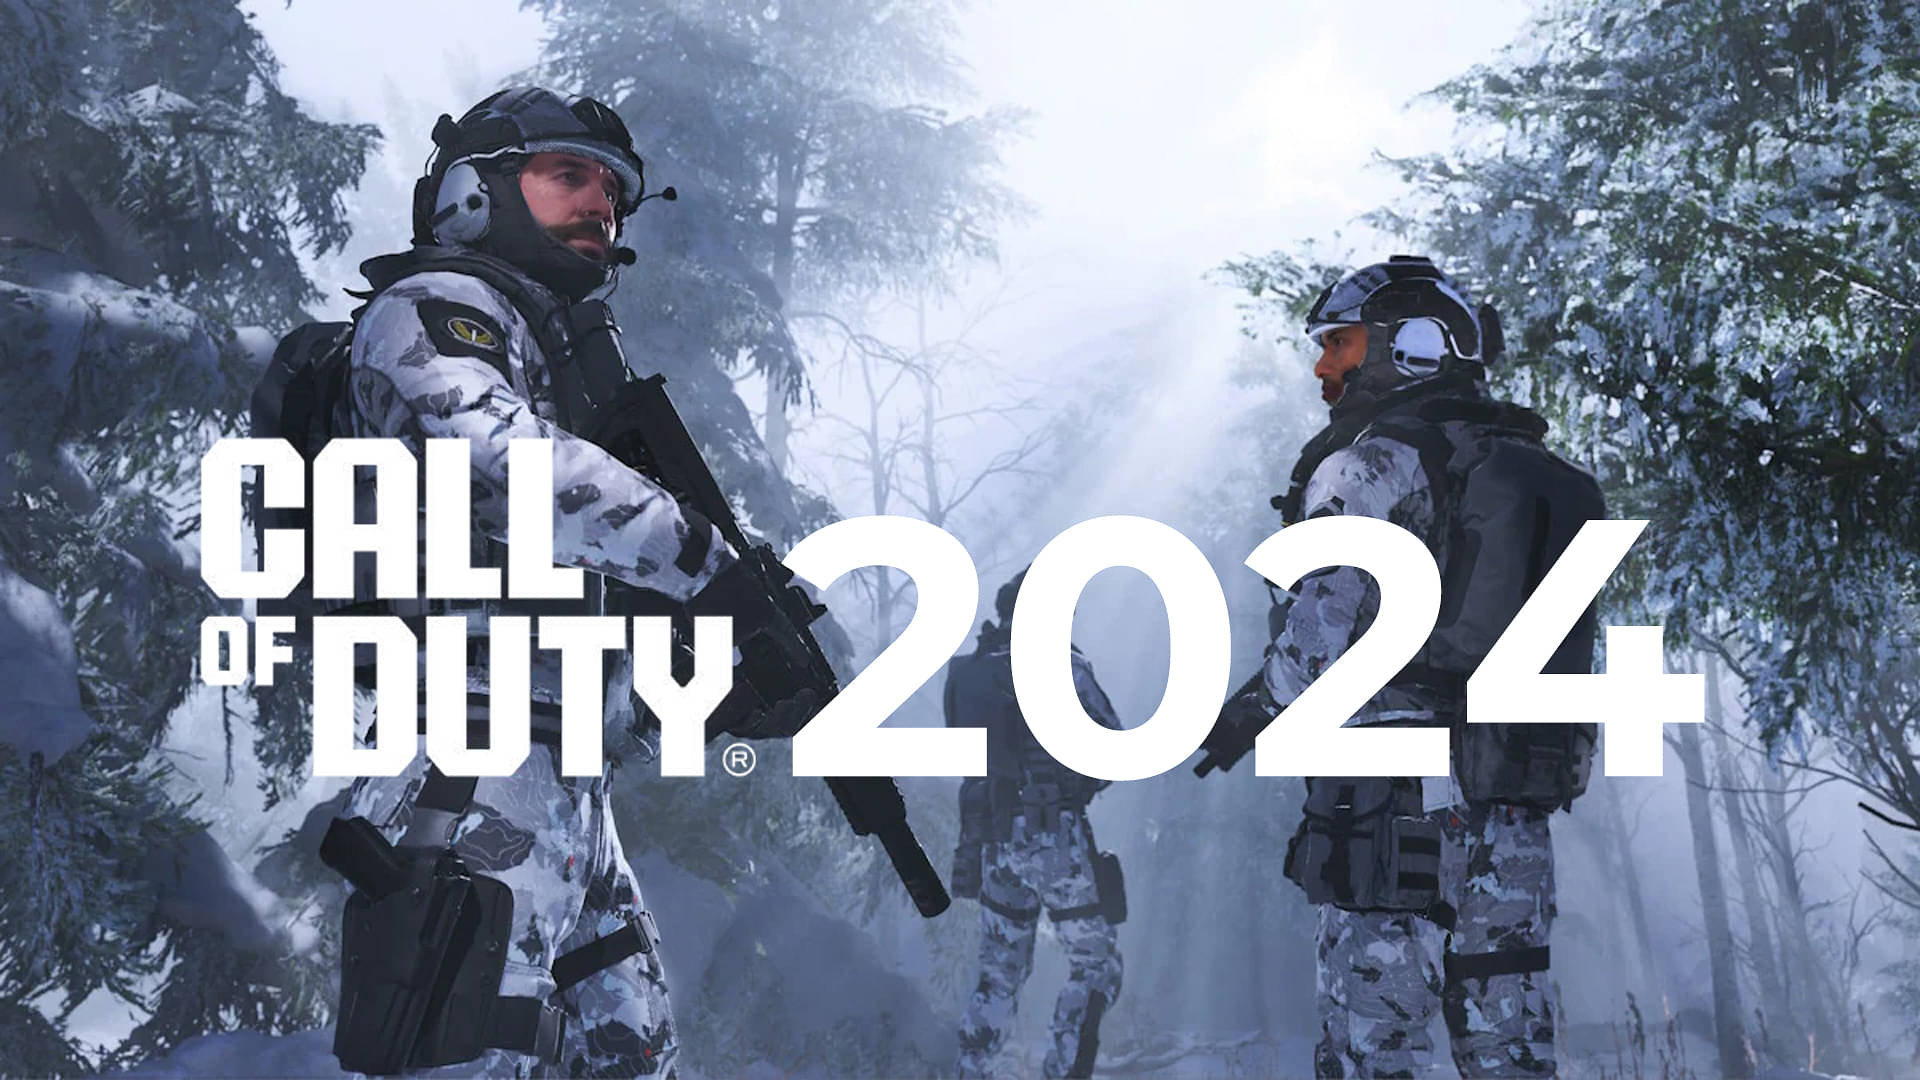 An image showing Call of Duty 2024